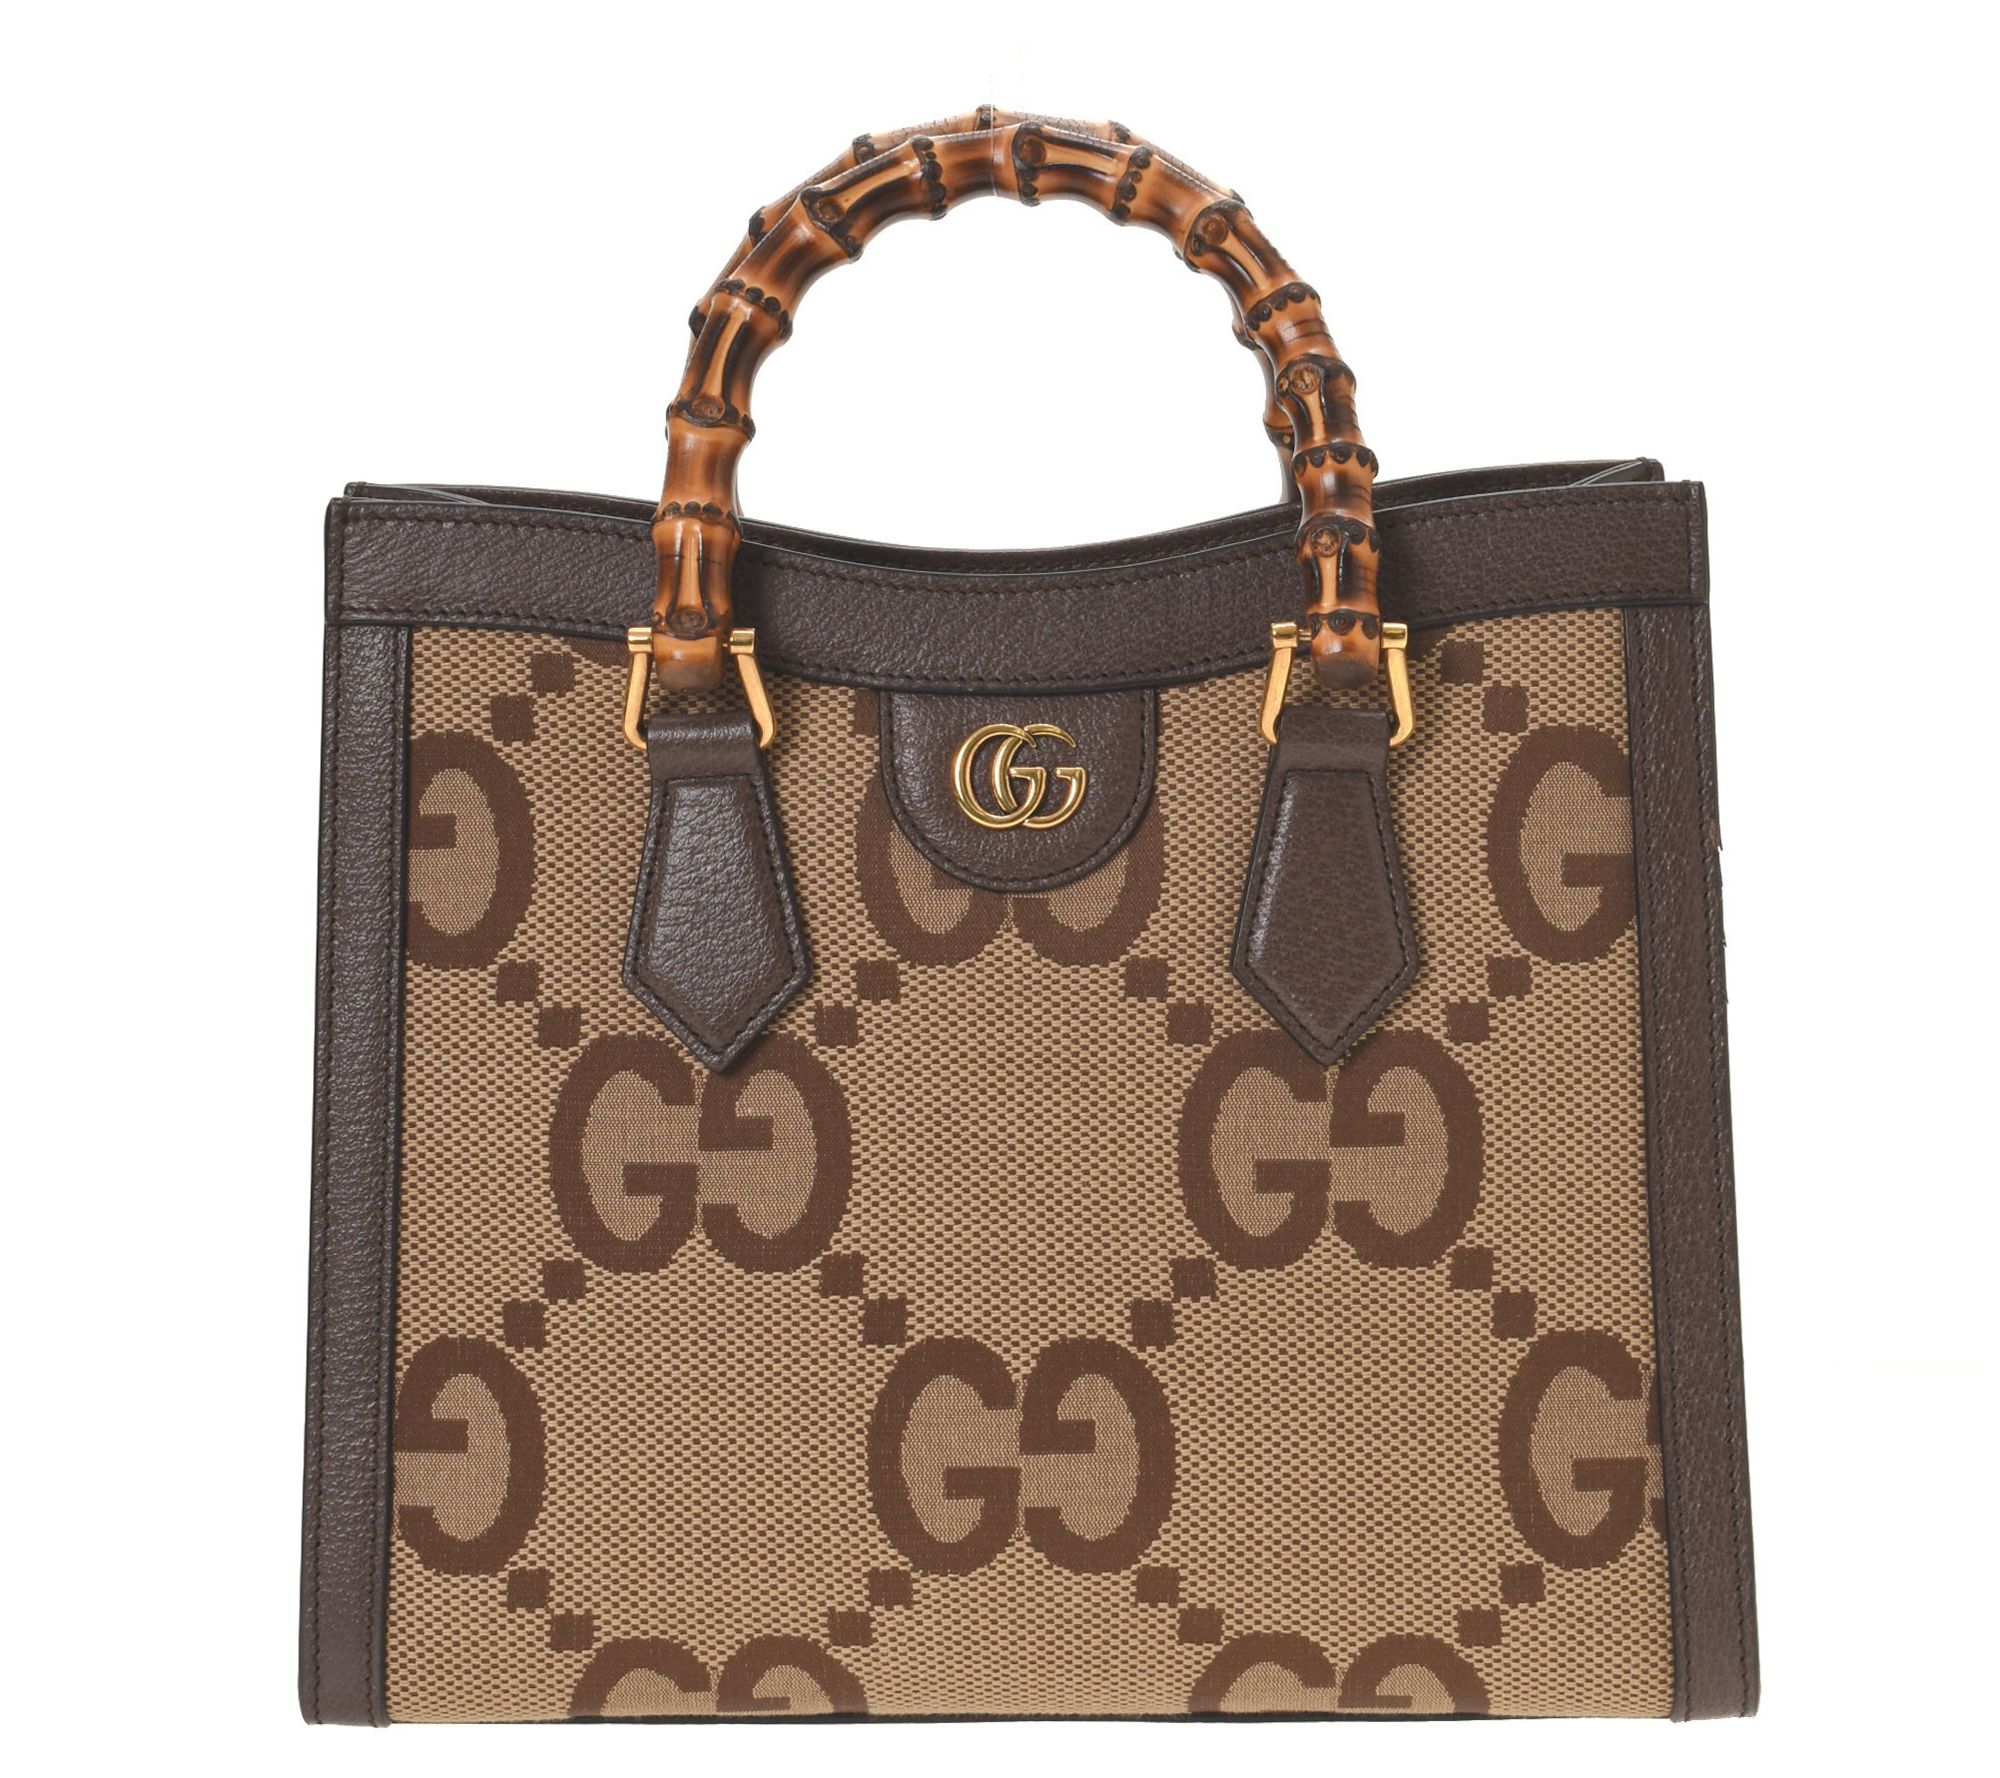 Gucci Pre-owned Women's Leather Tote Bag